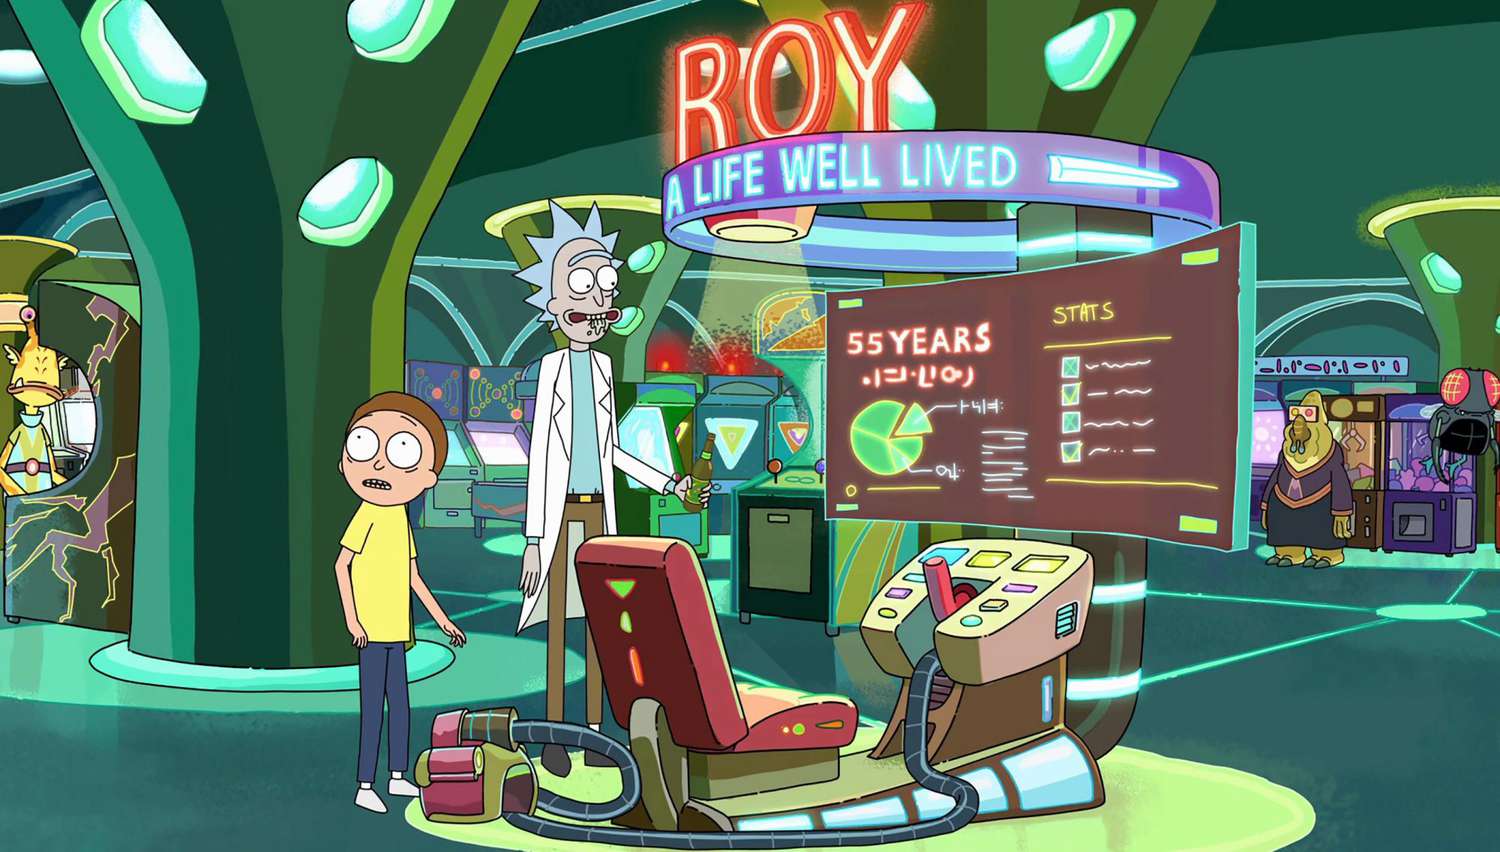 Ricky and Morty - Roy: A Life Well Lived (Season 2, Episode 2)